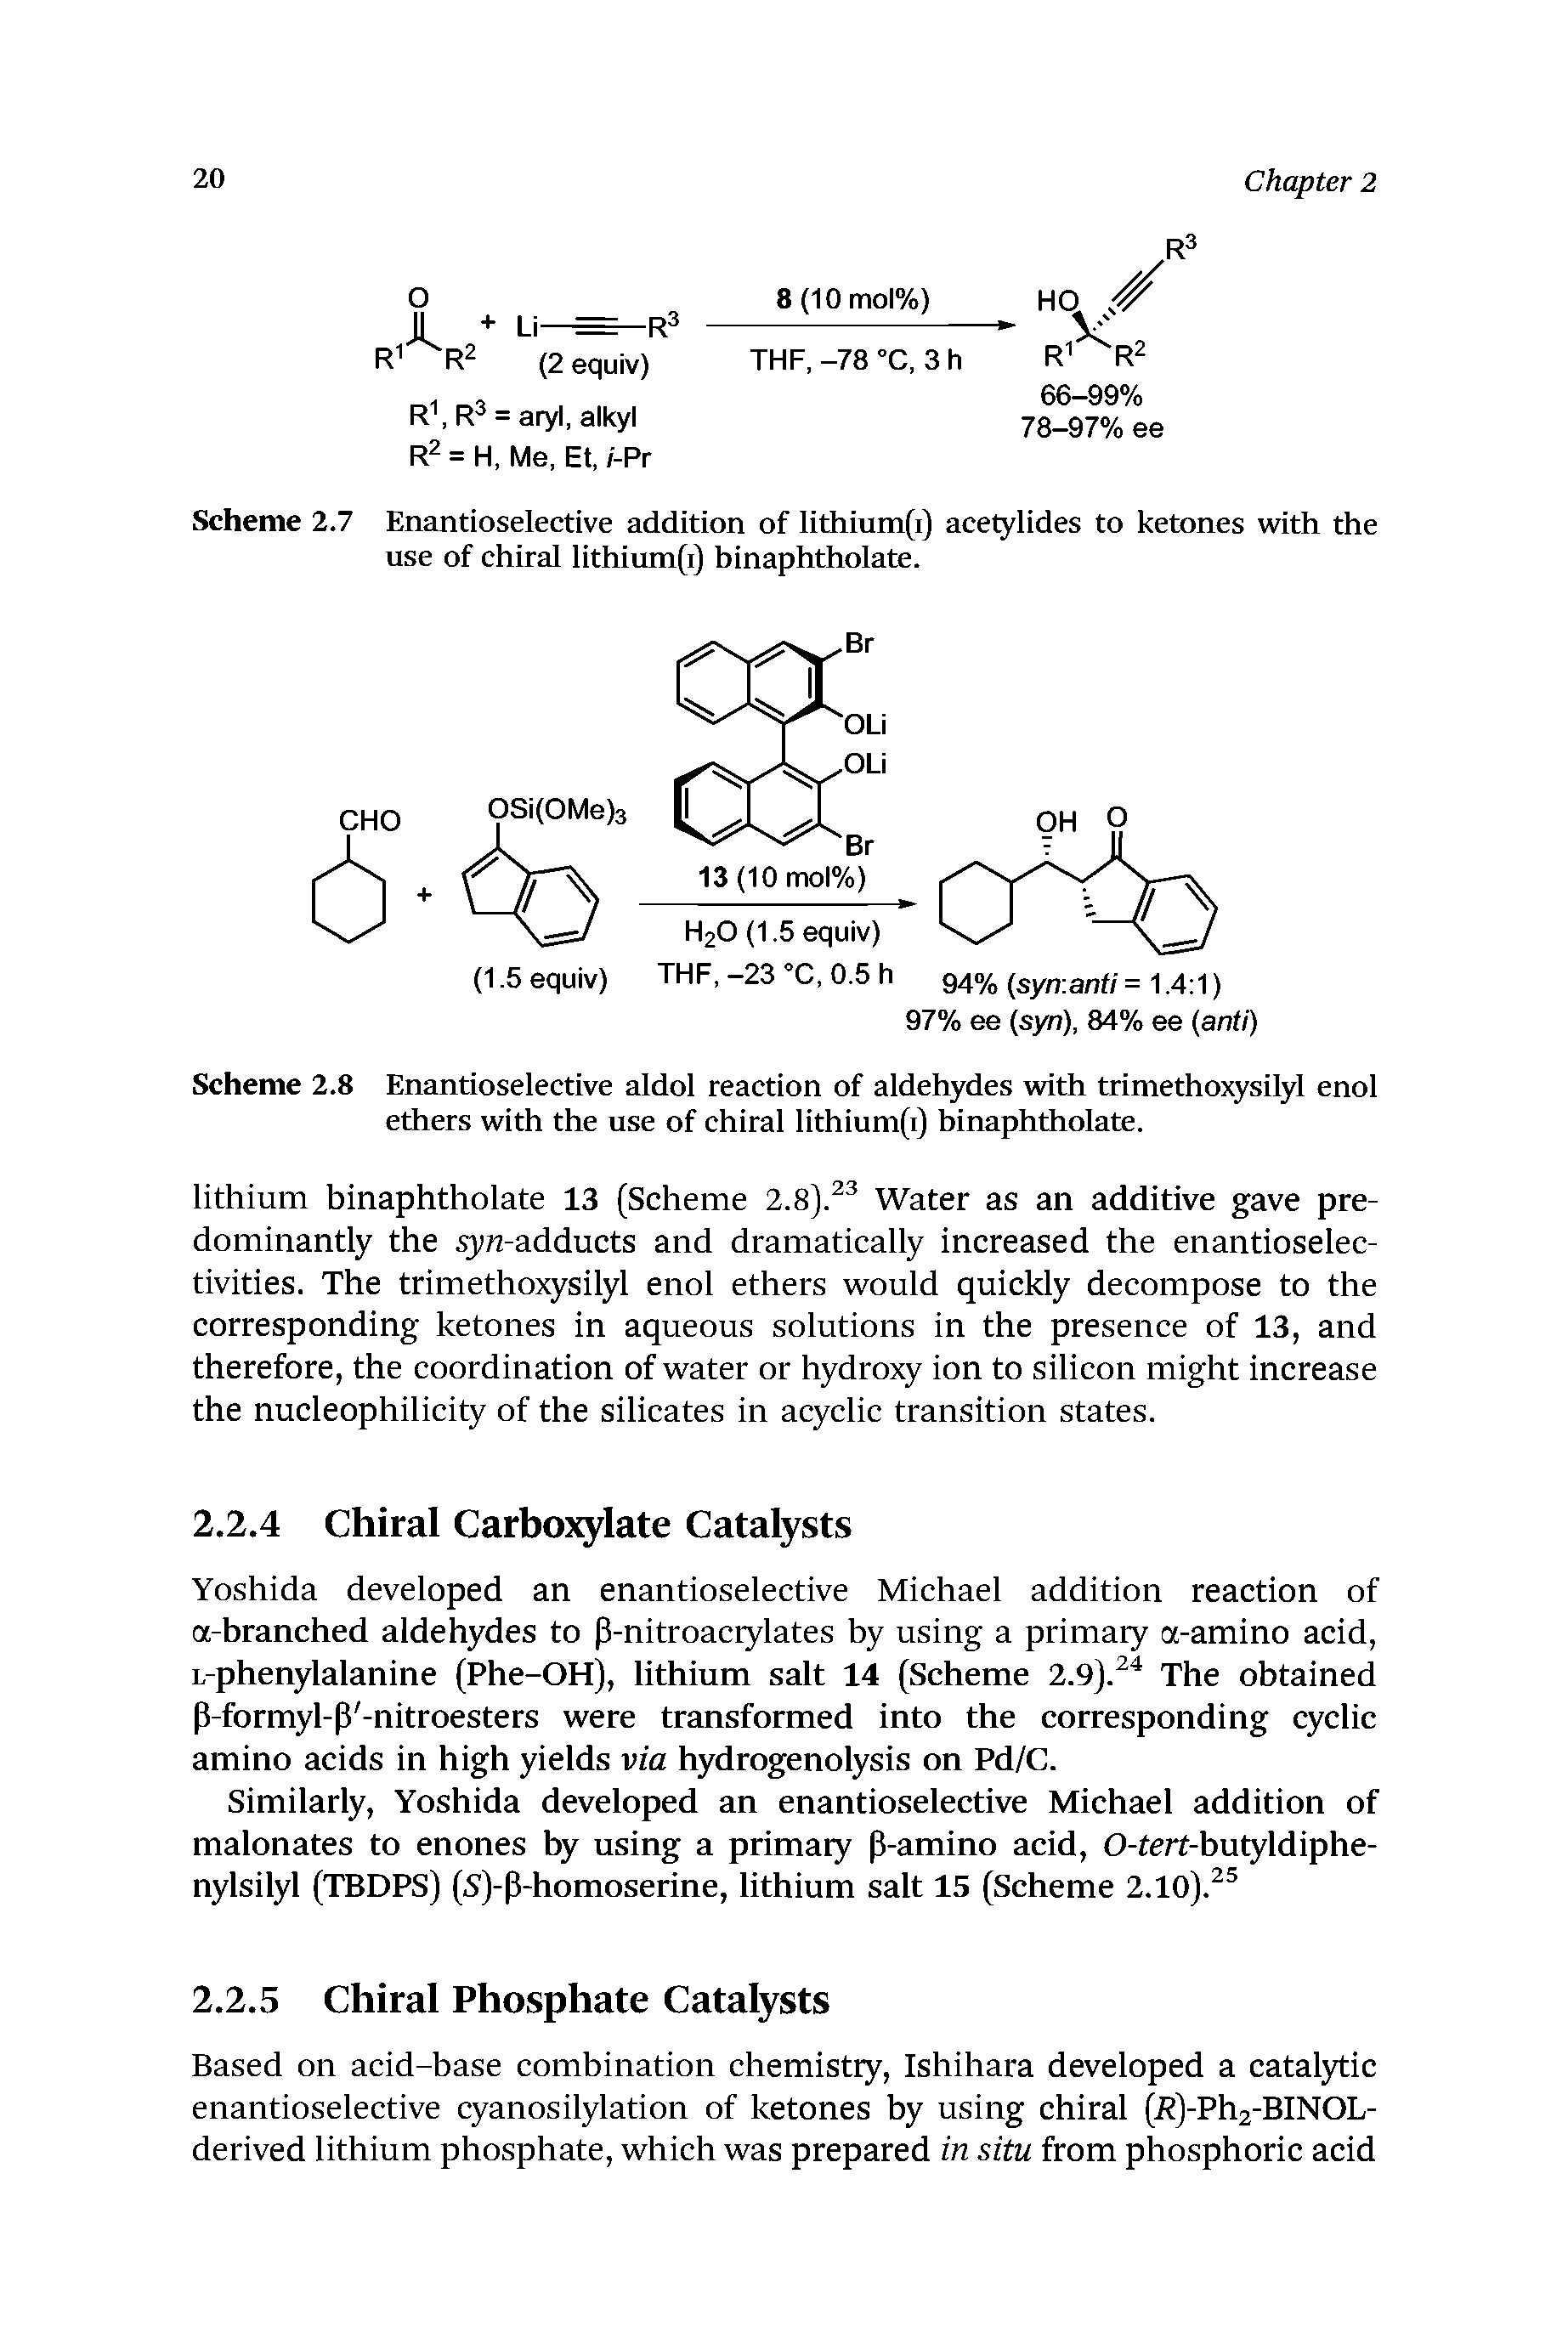 Scheme 2.8 Enantioselective aldol reaction of aldehydes with trimethoxysilyl enol ethers with the use of chiral lithium(i) binaphtholate.